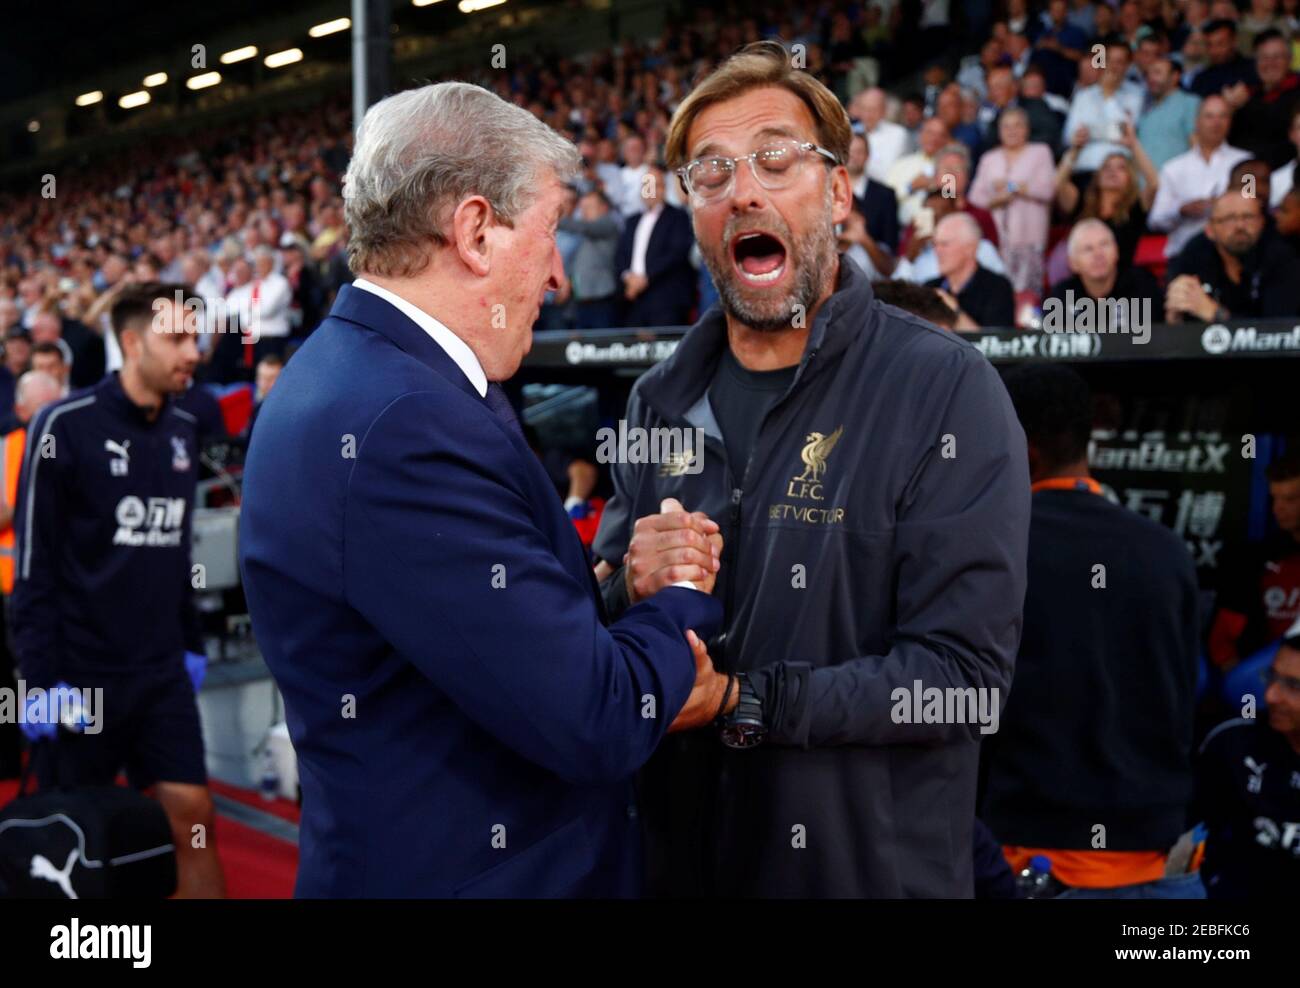 Soccer Football - Premier League - Crystal Palace v Liverpool - Selhurst Park, London, Britain - August 20, 2018  Crystal Palace manager Roy Hodgson with Liverpool manager Juergen Klopp before the match             REUTERS/Eddie Keogh  EDITORIAL USE ONLY. No use with unauthorized audio, video, data, fixture lists, club/league logos or "live" services. Online in-match use limited to 75 images, no video emulation. No use in betting, games or single club/league/player publications.  Please contact your account representative for further details. Stock Photo